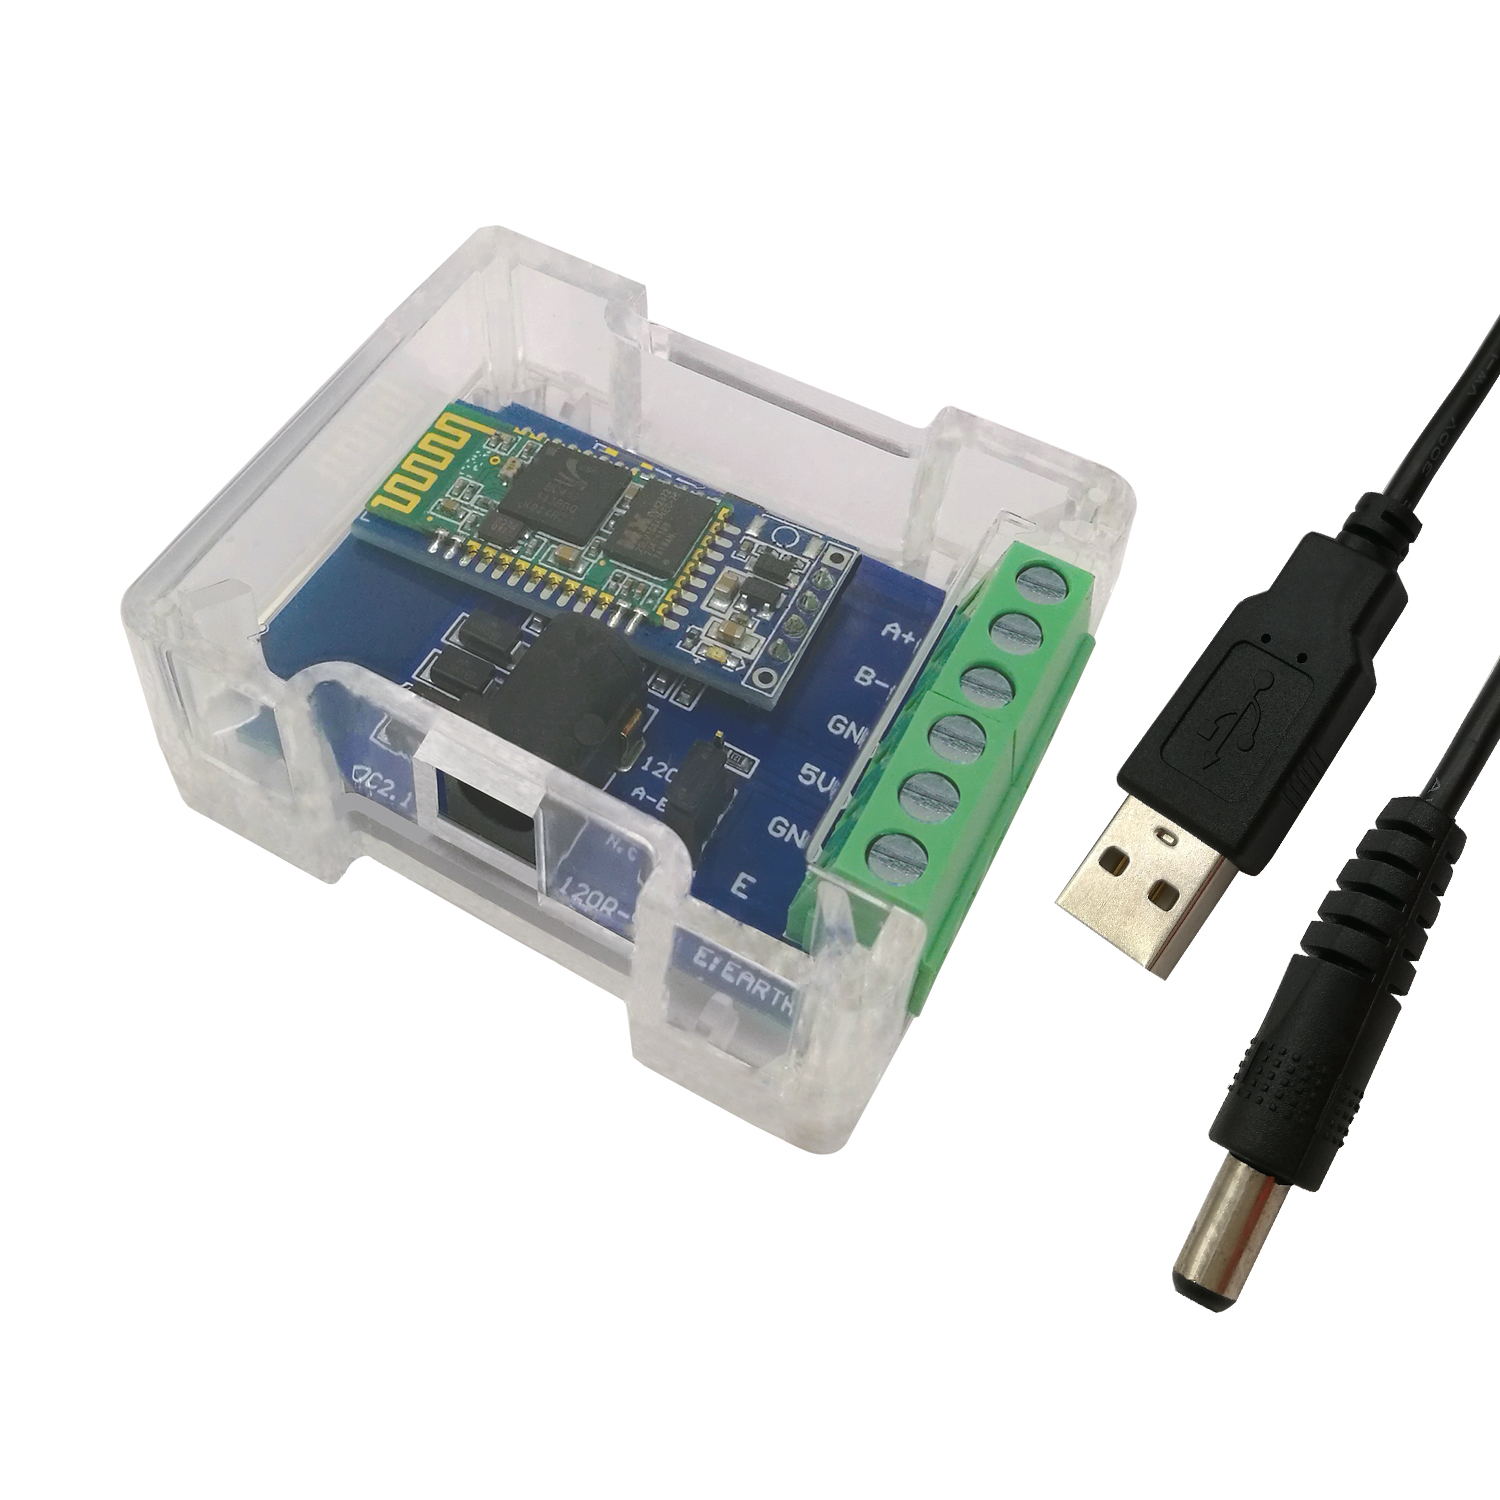 SH-B20 USB to RS485 Adapter